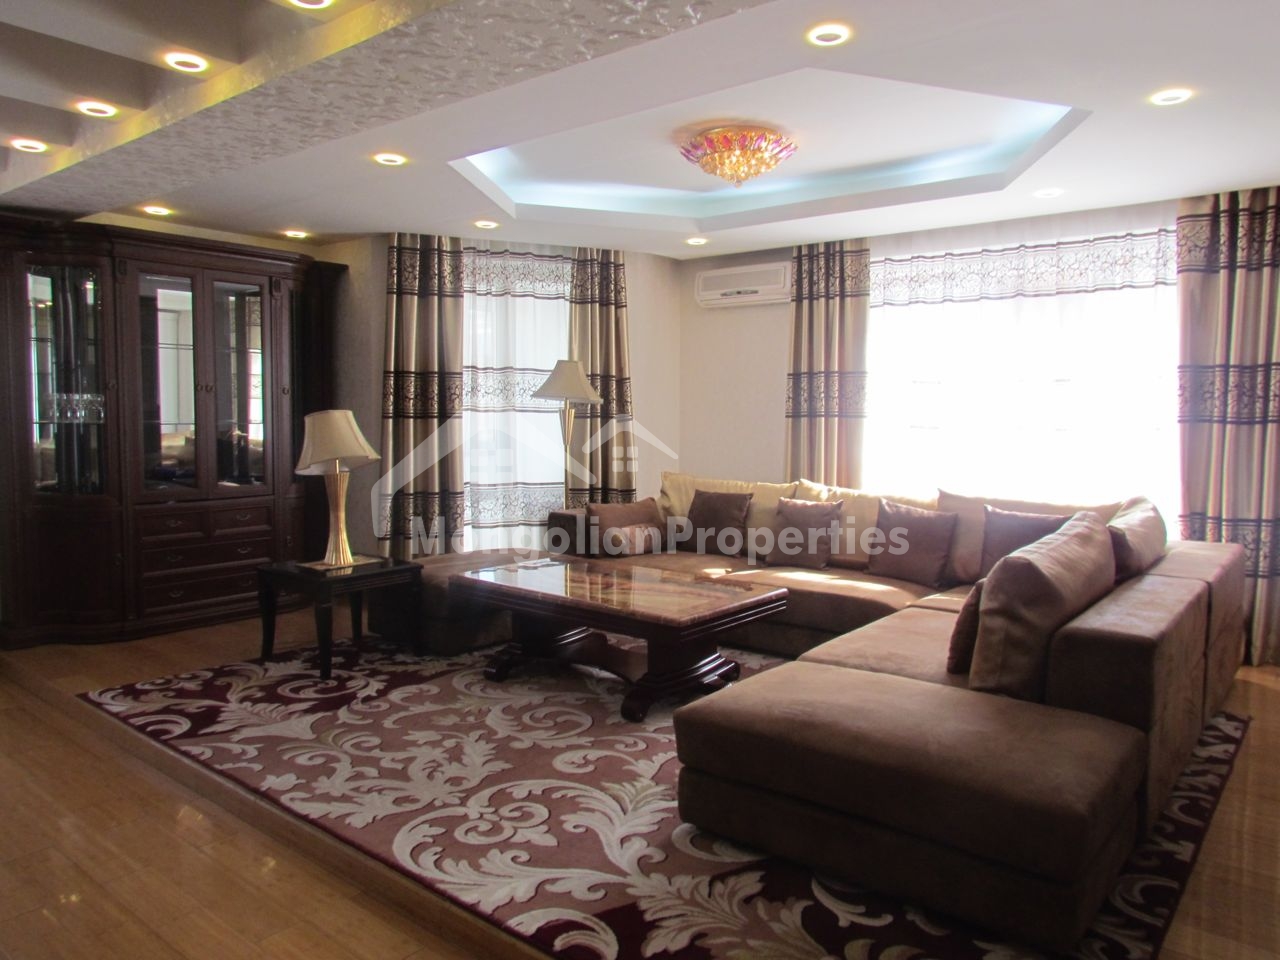 Spacious 3 bedroom apartment is for rent near Shangri -La hotel